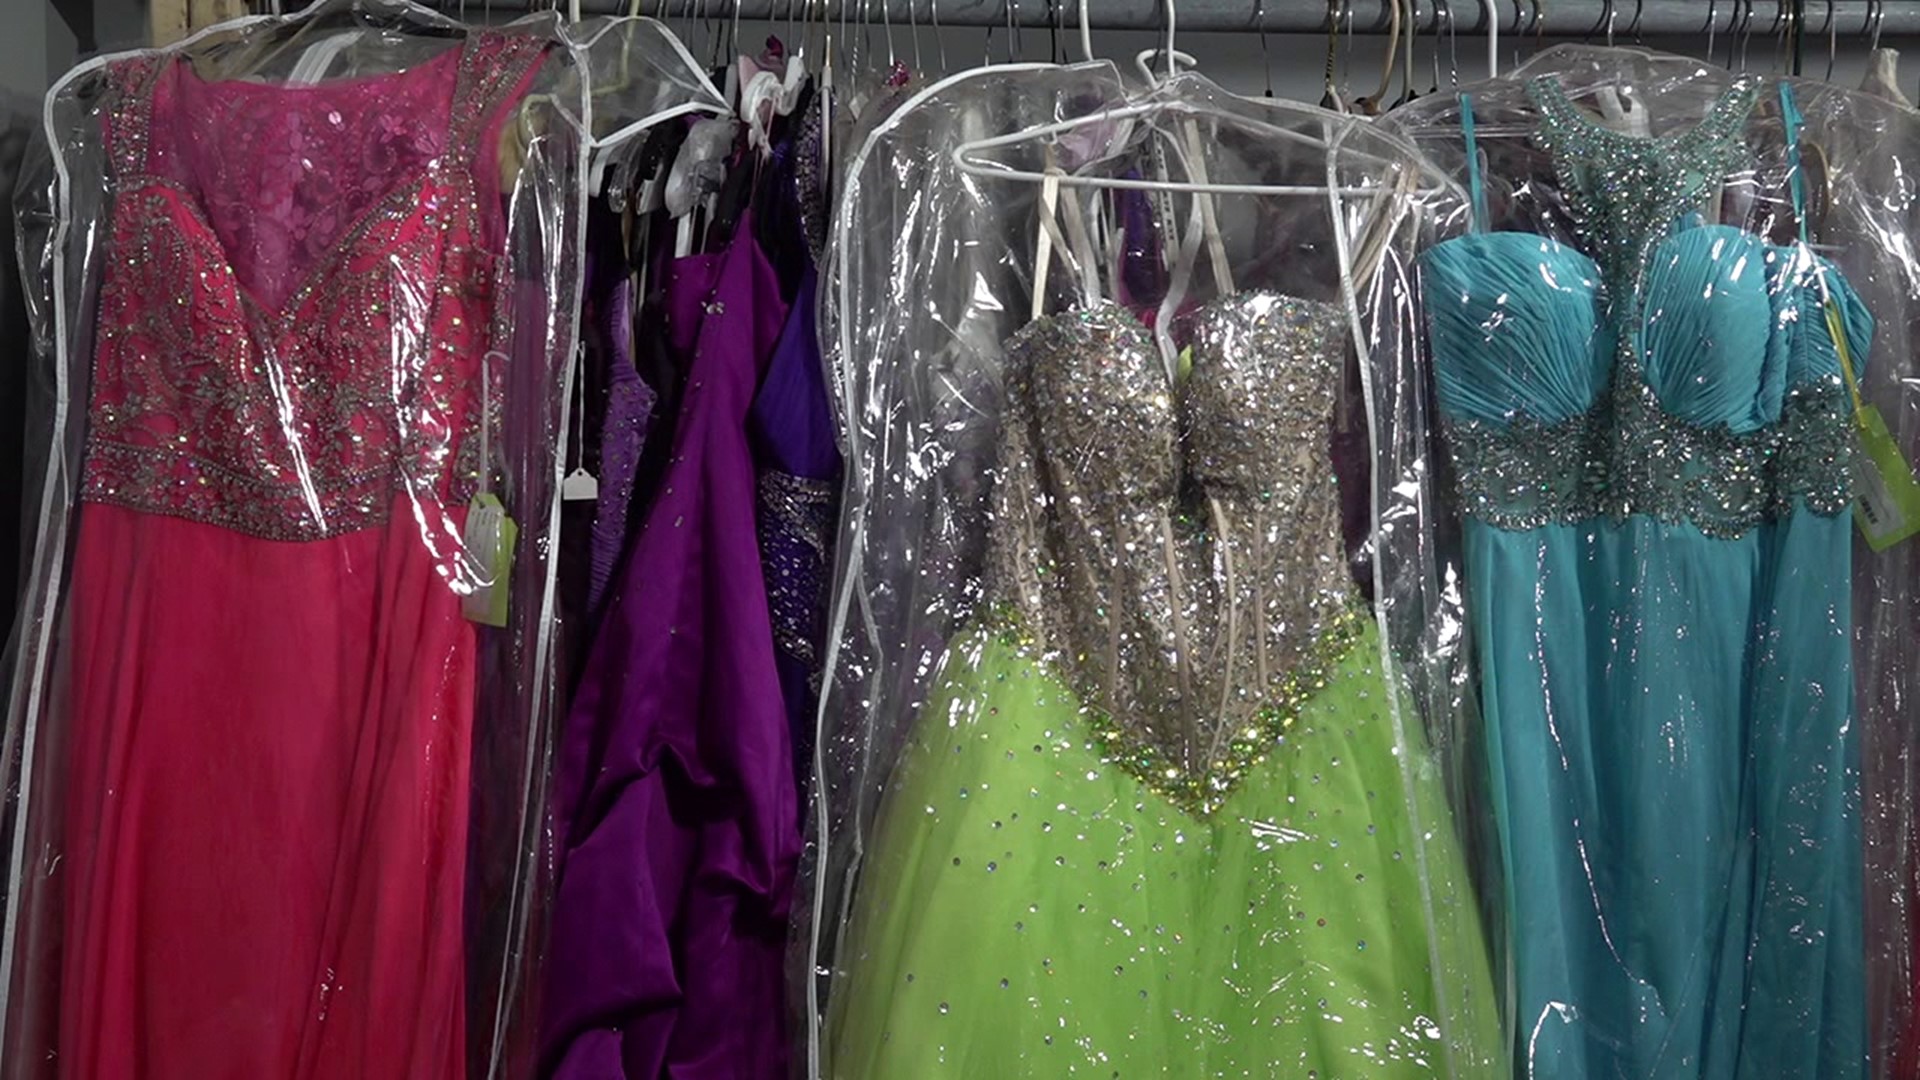 Prom season is right around the corner, and thanks to a dress drive in Luzerne County, Hazleton Area School District students will have hundreds of dress options.